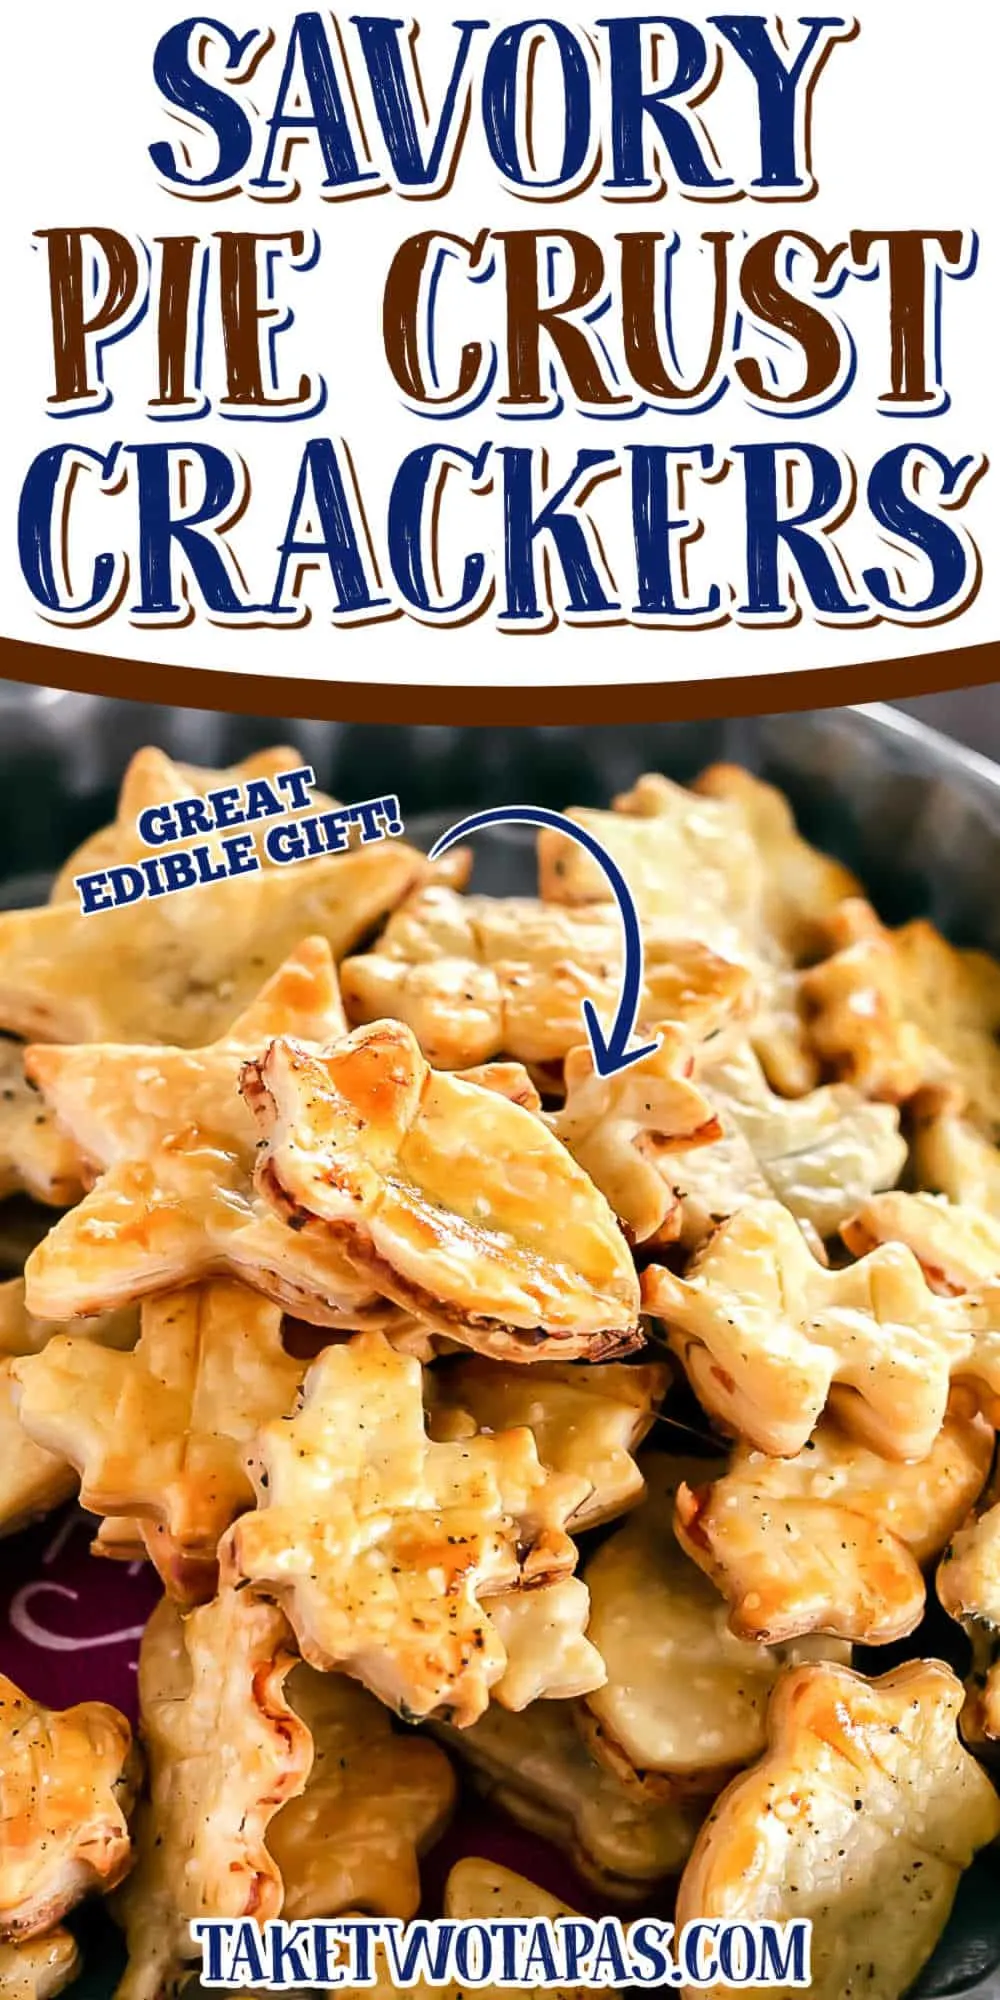 crackers with text "savory pie crust crackers"